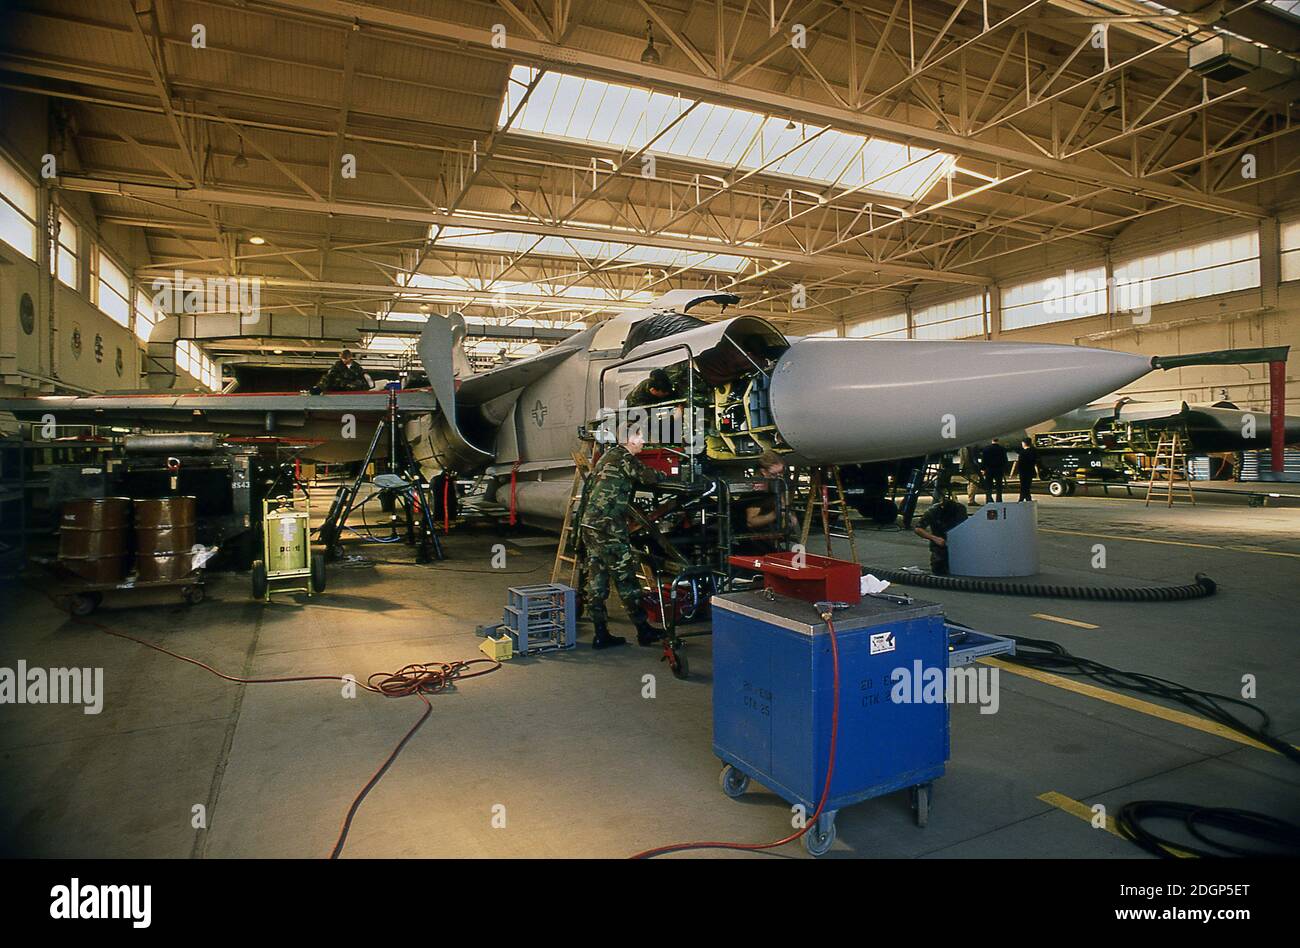 RAF Upper Heyford airbase Oxfordshire UK 1990. Home of 20th Tactical Fighter wing USAF. Ground crew technicians working on  F111 Aardvark's in a base hanger.. Stock Photo